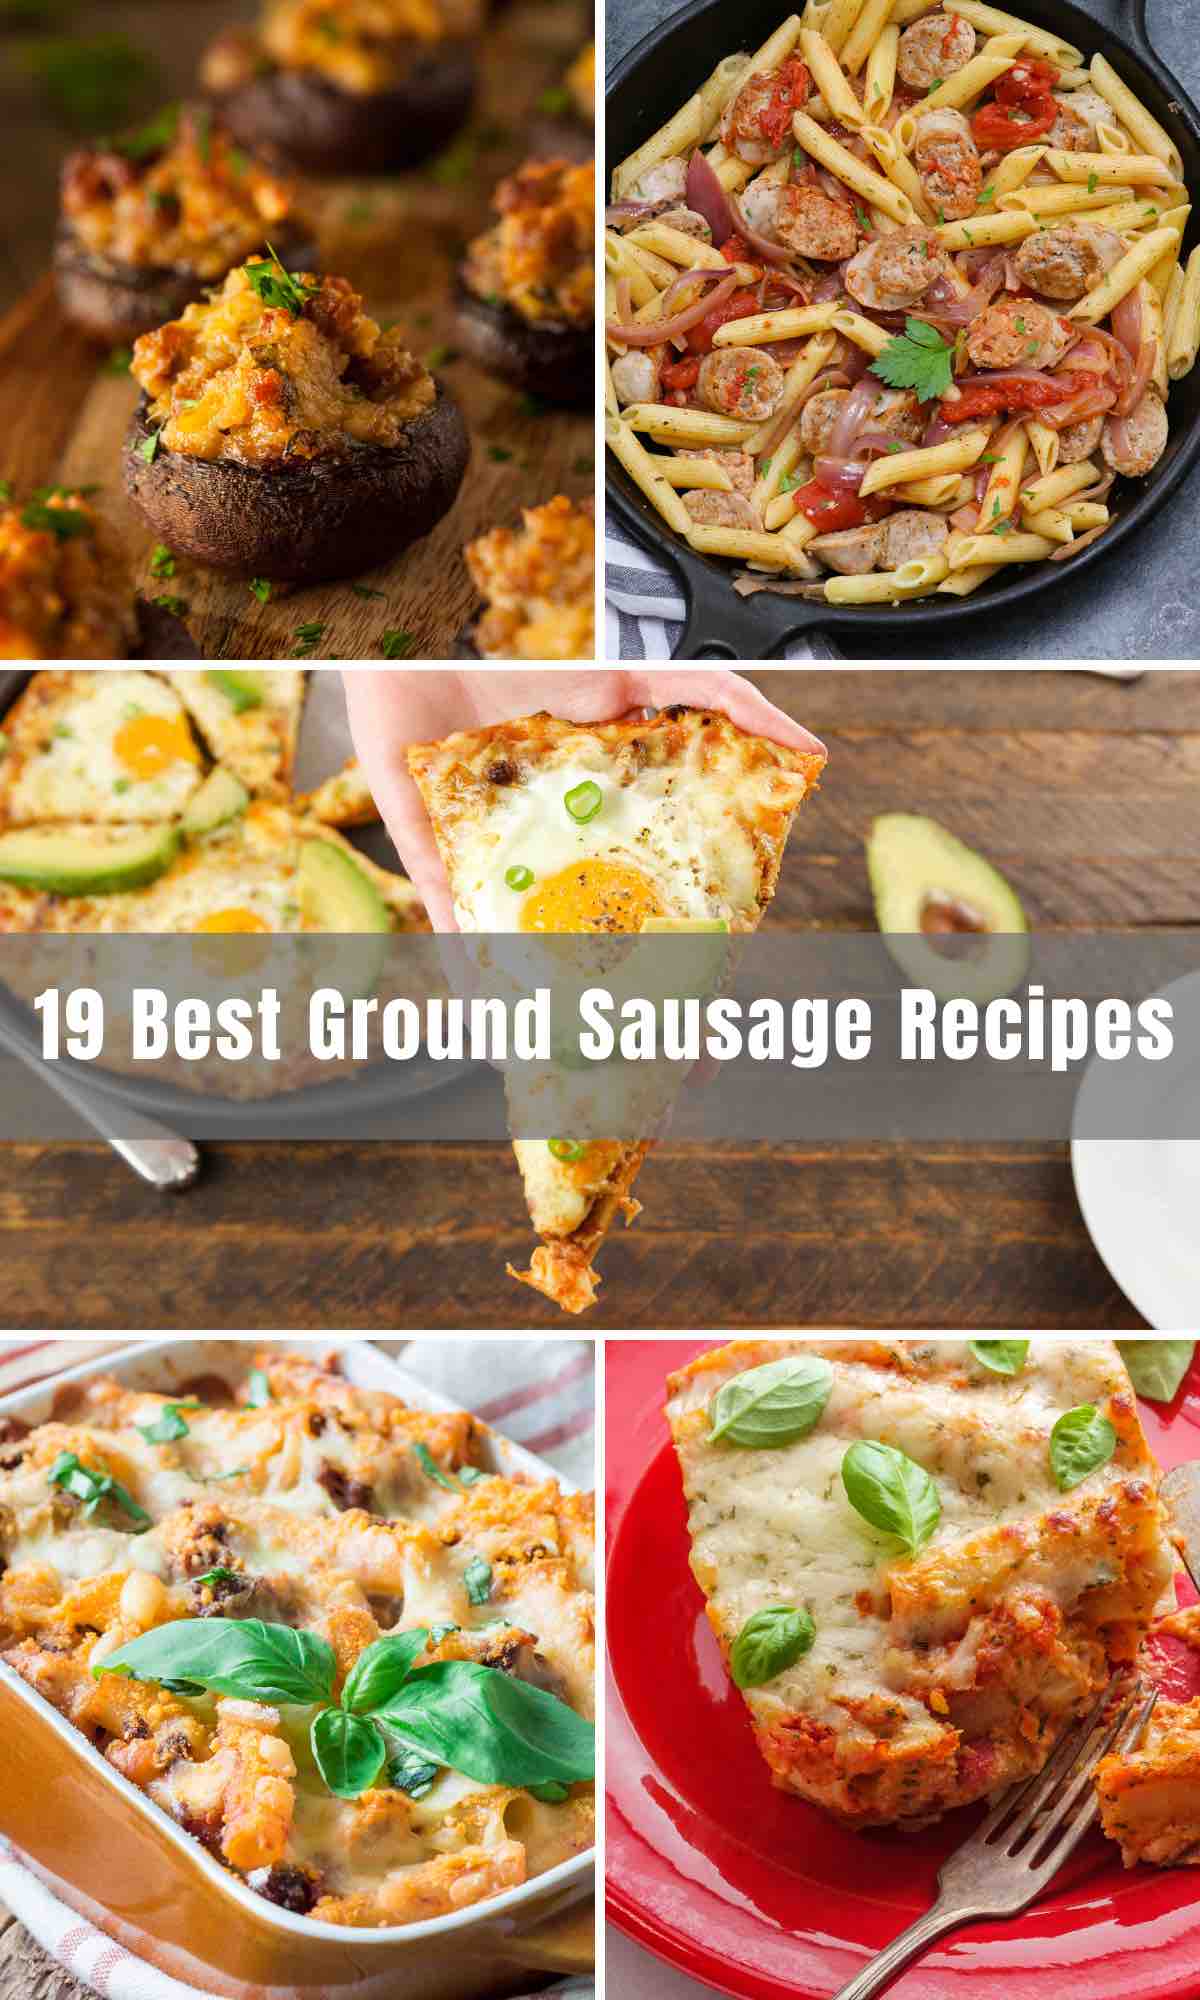 19 Best Ground Sausage Recipes That Are Easy And Delicious